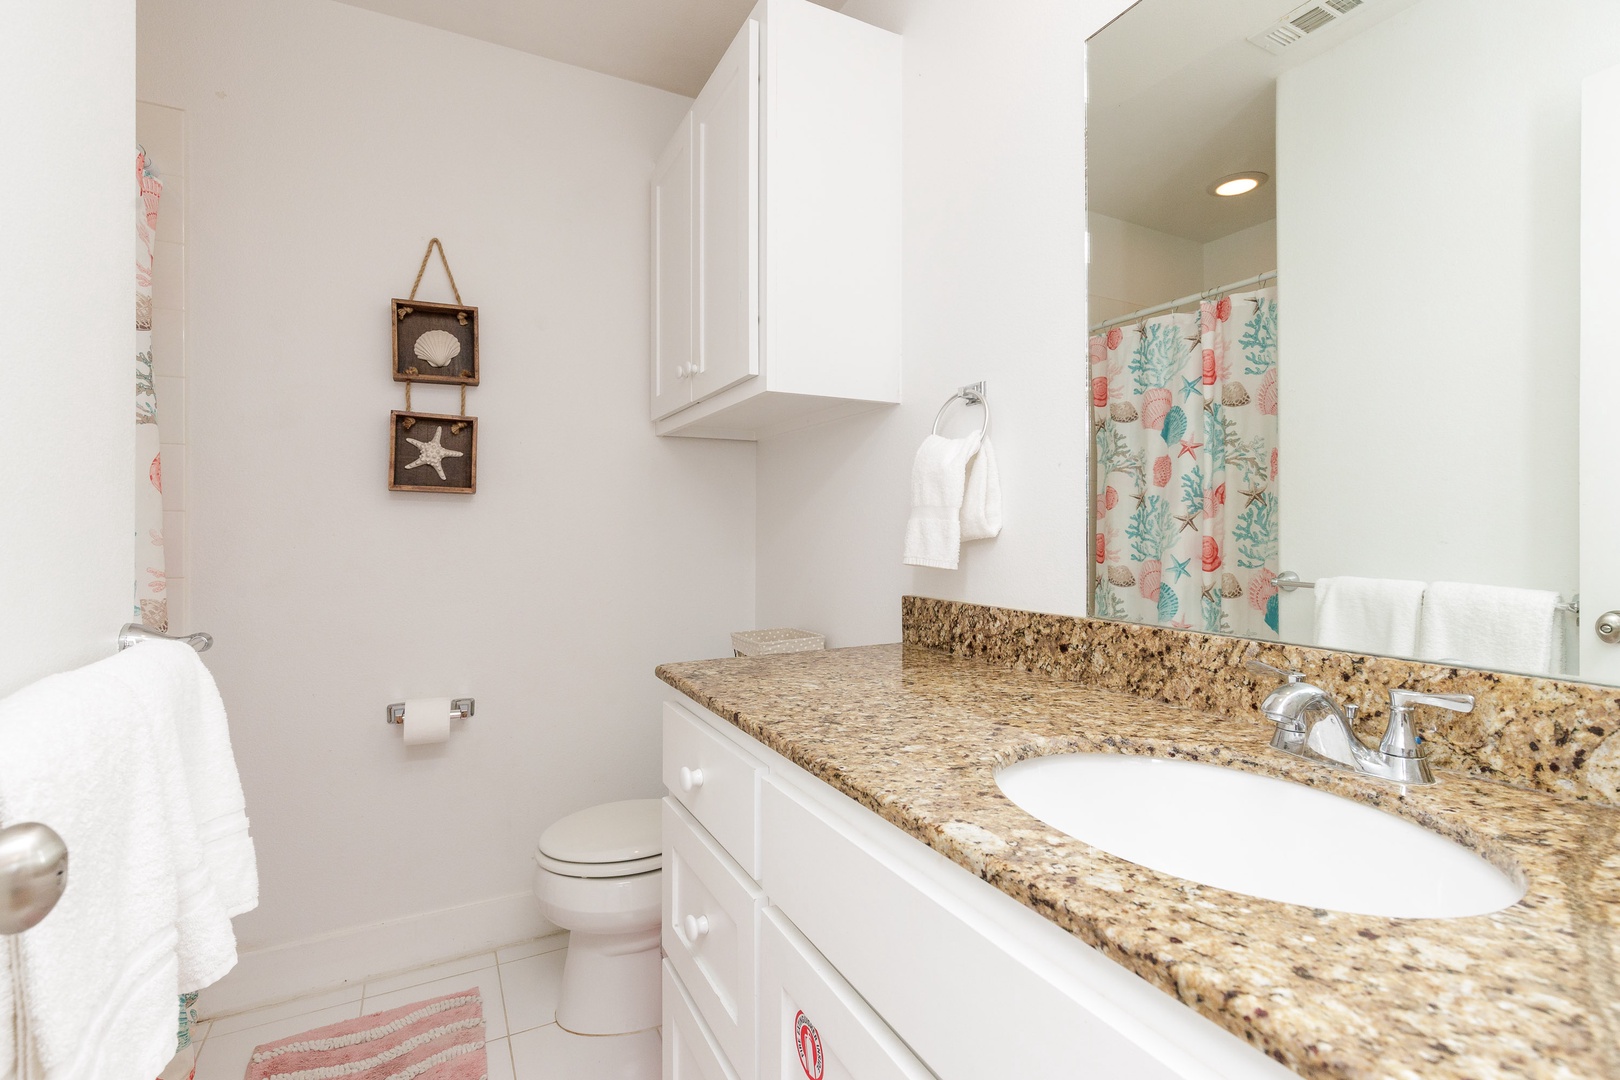 The common 2nd floor full bath includes a single vanity & walk-in shower